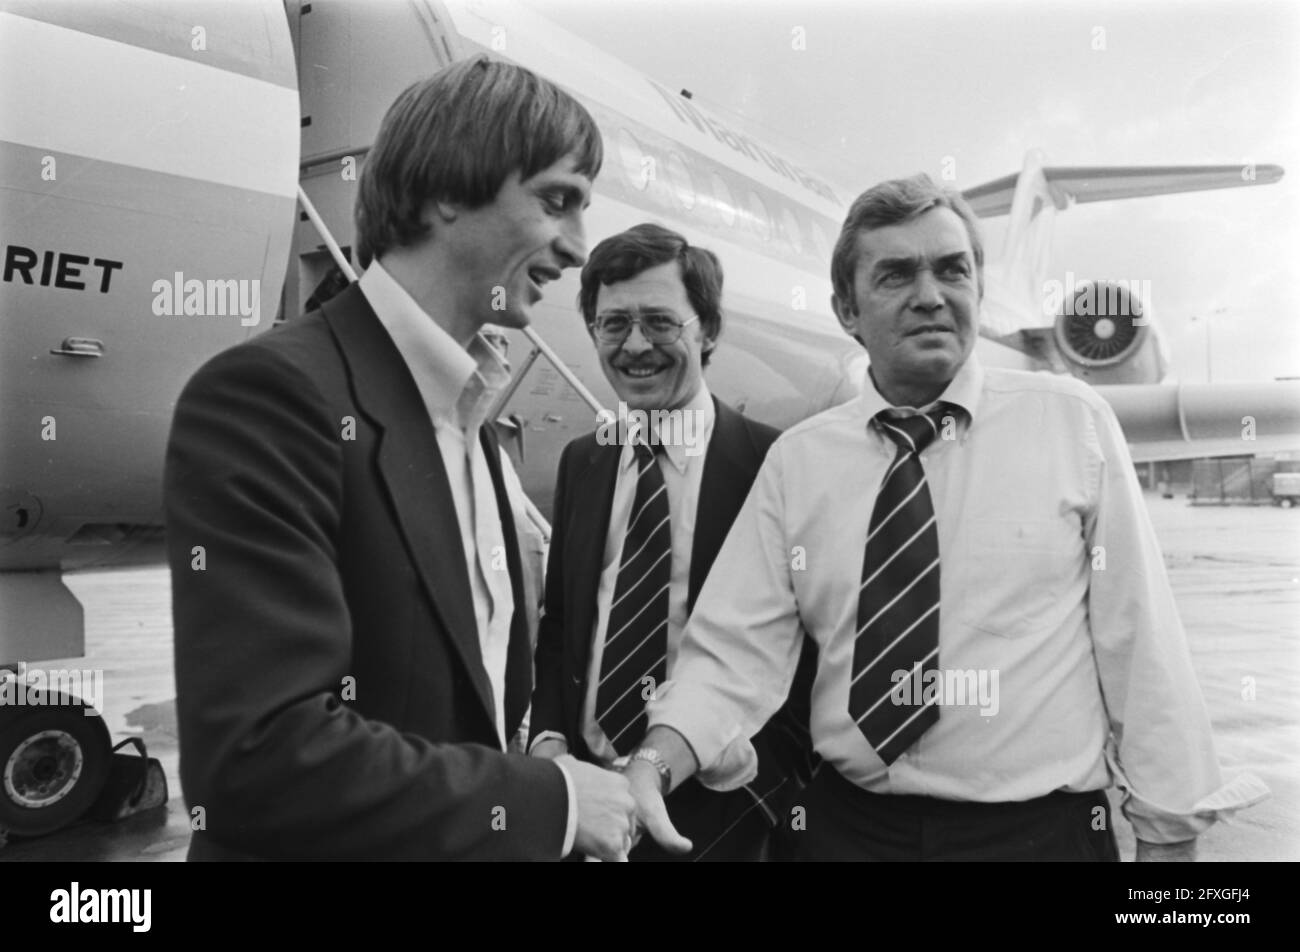 Departure of Dutch national team from Schiphol Airport to Northern Ireland Cruijff (l) with trainer Happel, October 10, 1977, sports, trainers, soccer, The Netherlands, 20th century press agency photo, news to remember, documentary, historic photography 1945-1990, visual stories, human history of the Twentieth Century, capturing moments in time Stock Photo